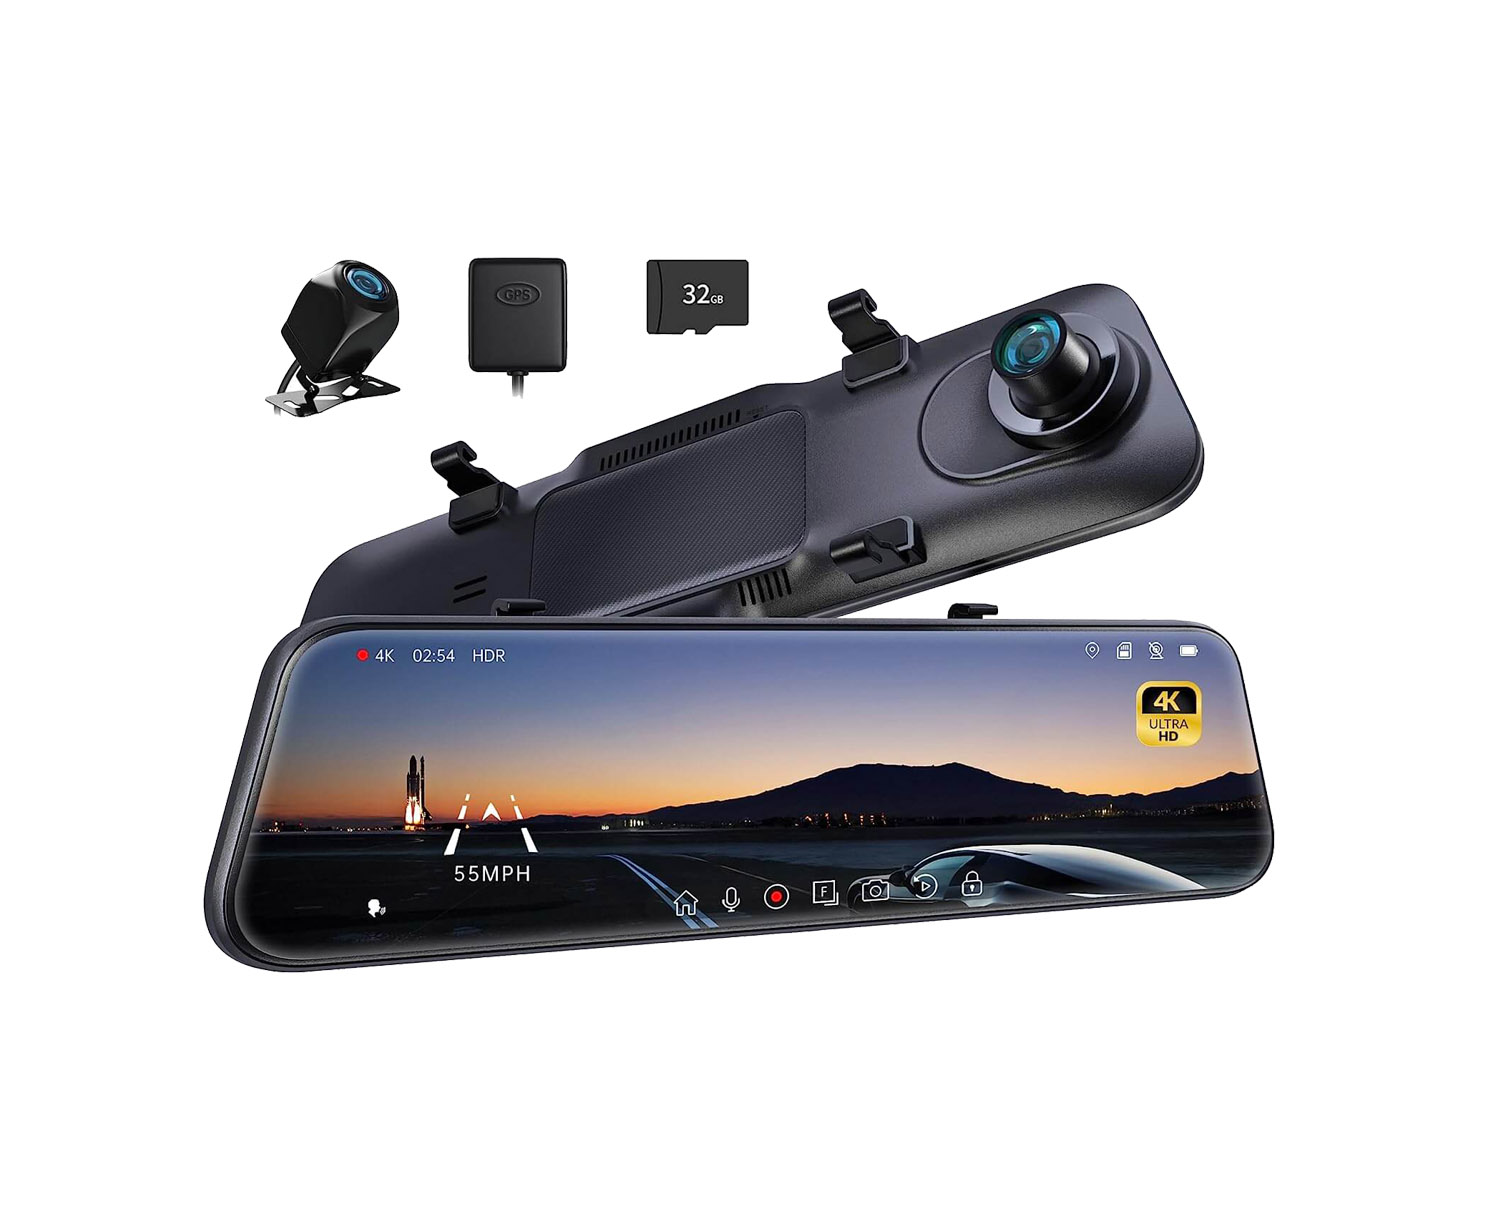 OMBAR Dash Cam Front and Rear 4K/2K/1080P+1080P 5G WiFi GPS, Dash Camera  for Cars with Free 64G SD Card, Dual Dash Cam with WDR Night Vision, 24h